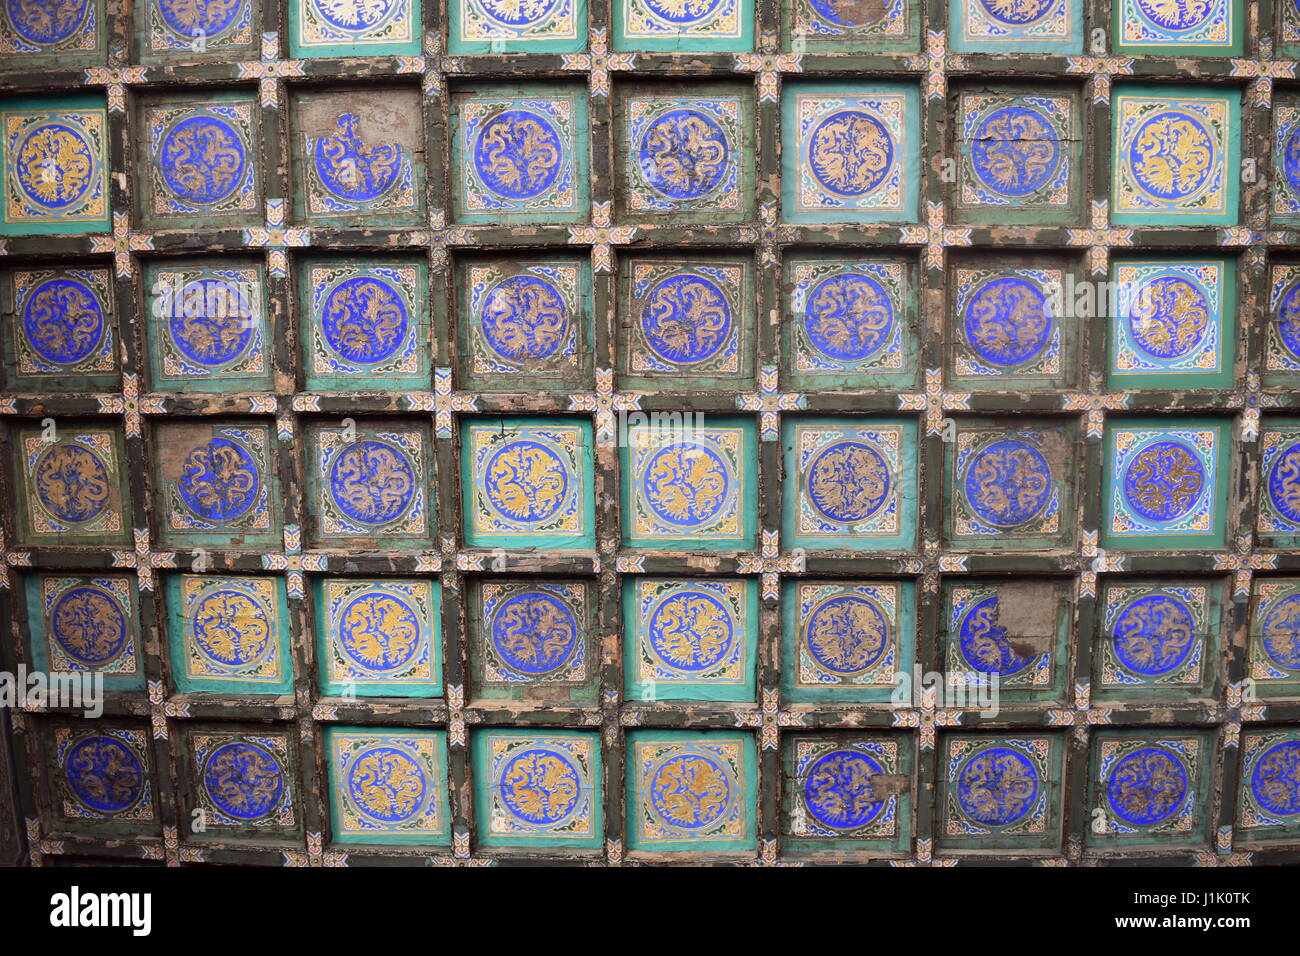 Beautiful Chinese art decorations on ceiling of the Beijing Forbidden City palace complex Stock Photo